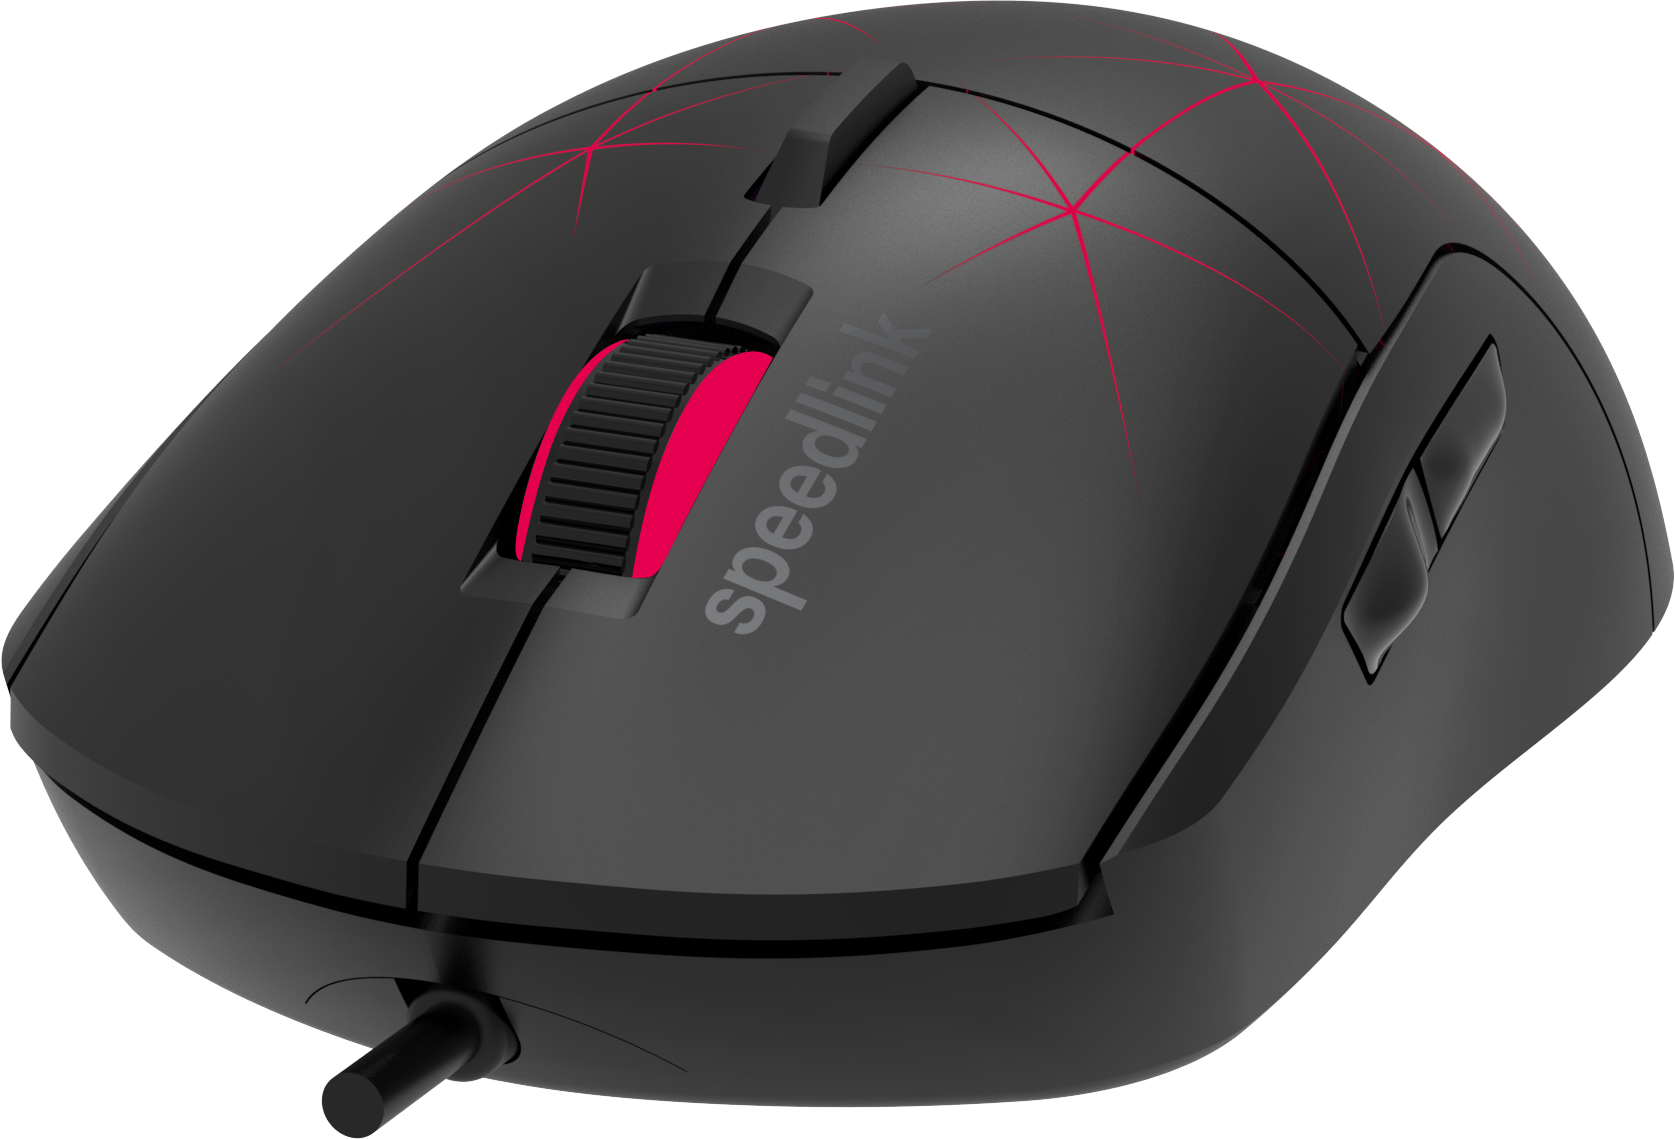 CORAX Gaming Mouse, black